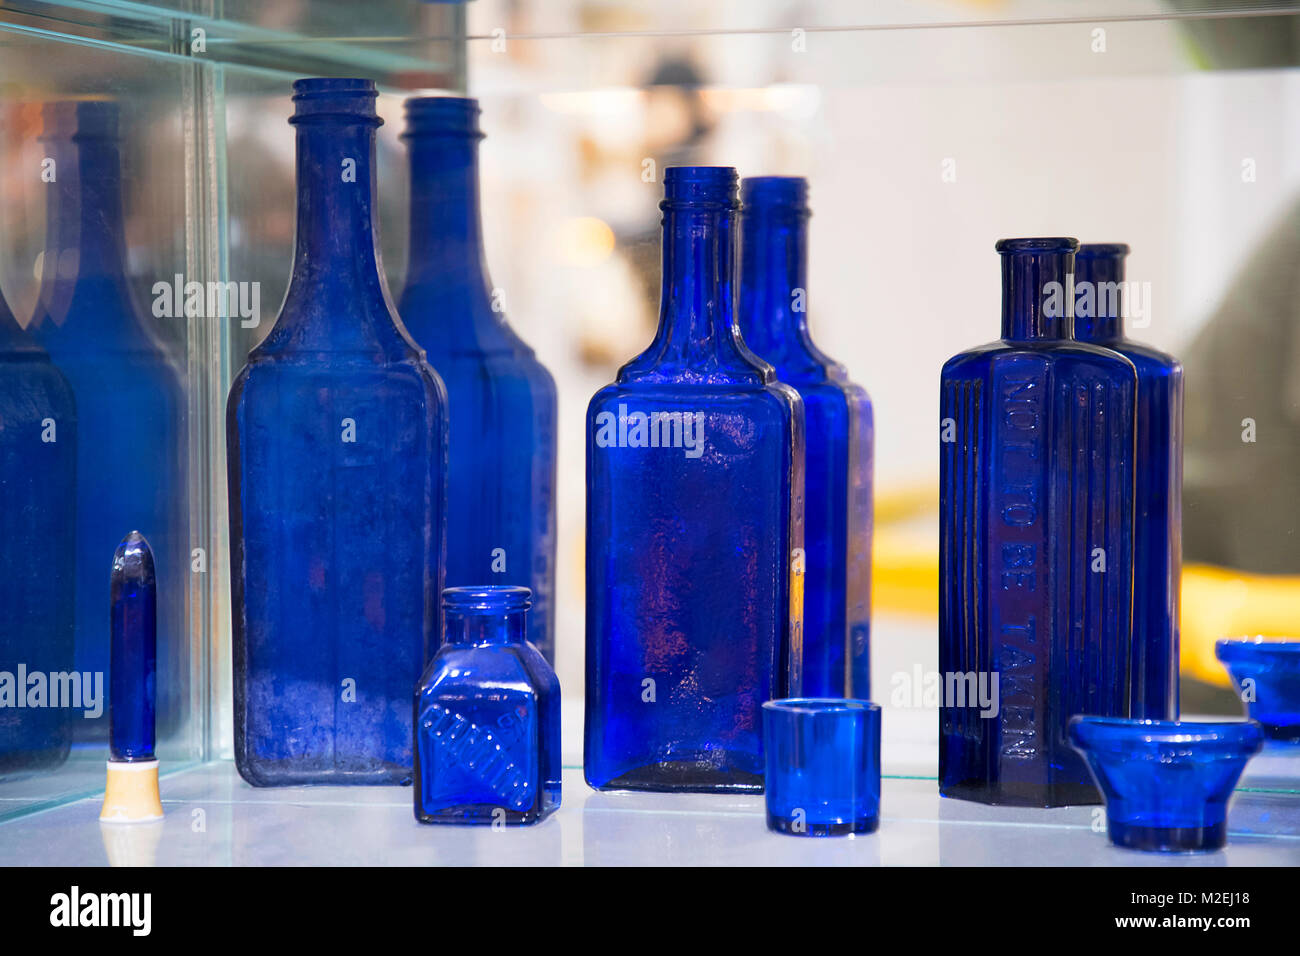 Cobalt glass known as SMALT, prepared by using cobalt compound, cobalt oxide or carbonate in a glass melt. Its glassware is used as decorative glass Stock Photo